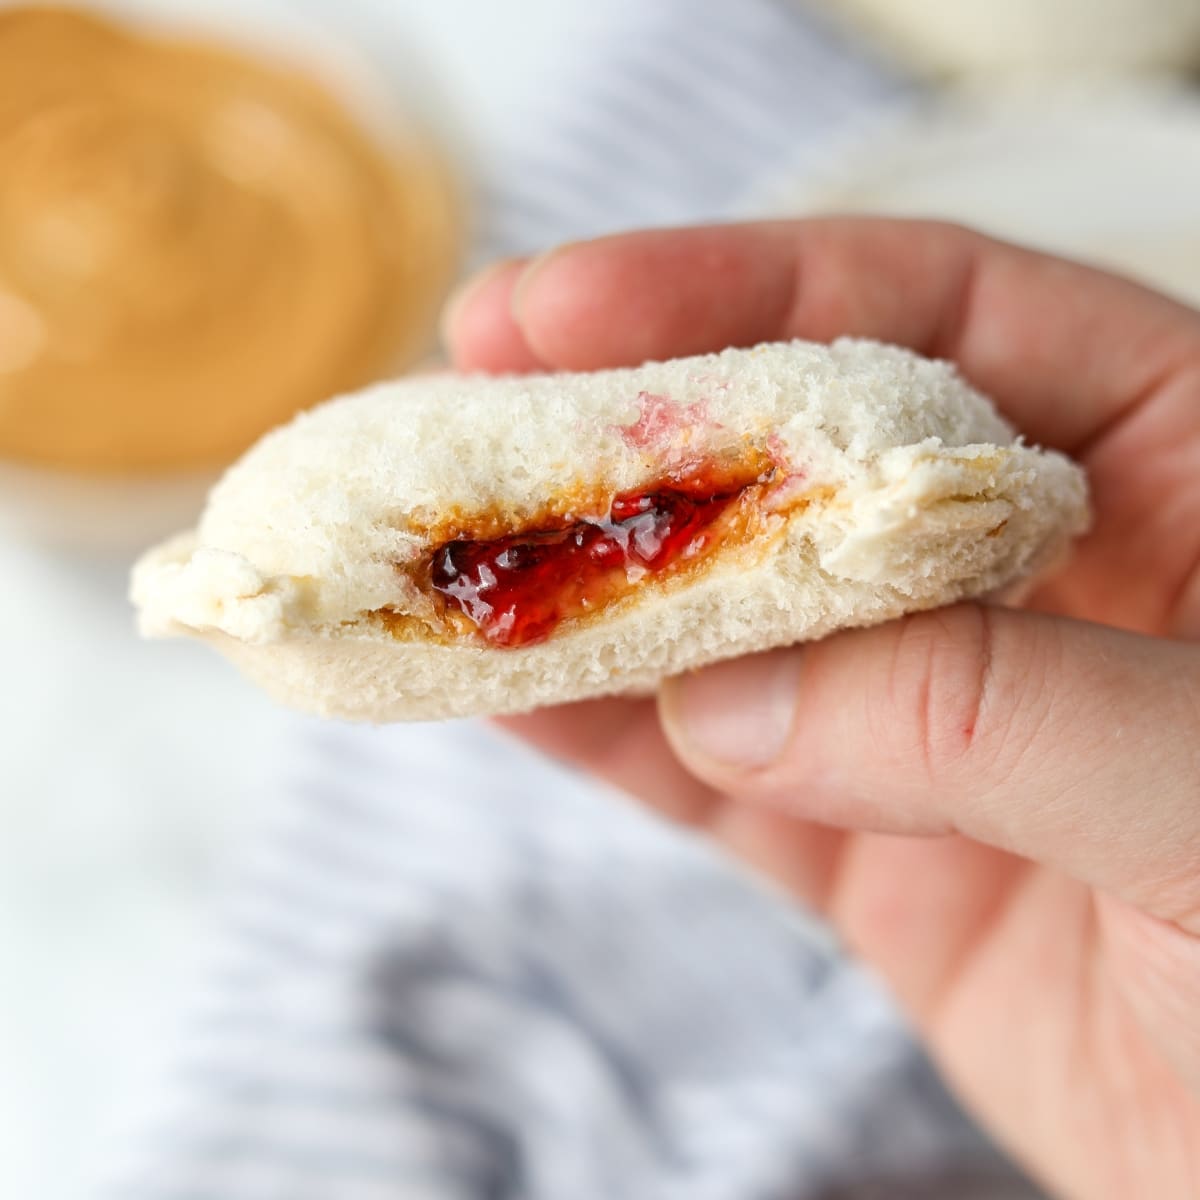 How to Make Your Own Uncrustables Sandwiches